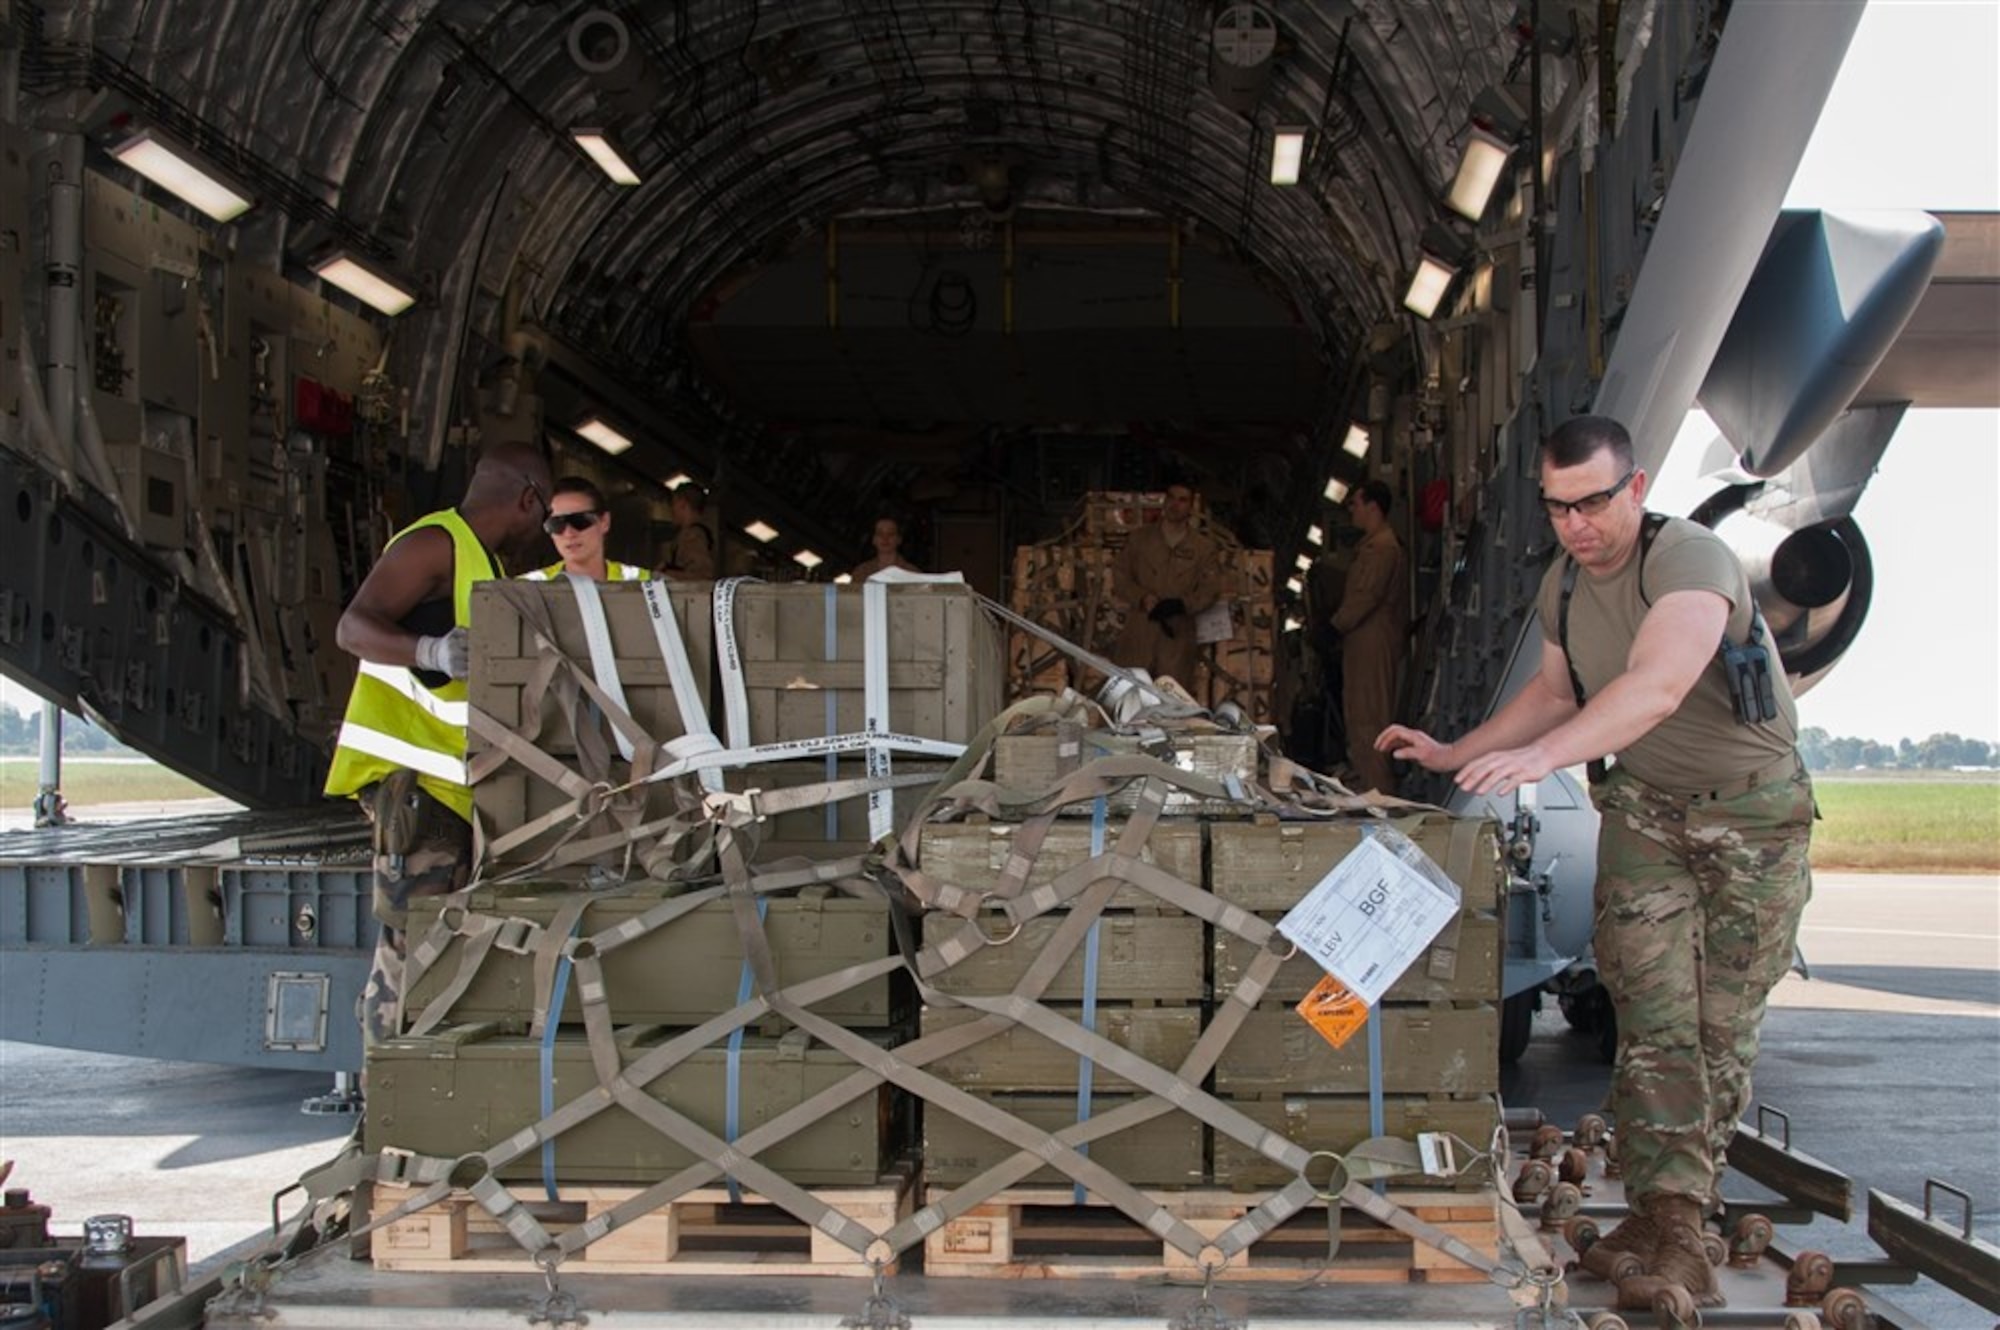 Airmen from the 621st Contingency Response Wing work alongside French and Gabonese forces to load cargo onto a C-17 Globemaster III in Libreville, Gabon, Dec. 15, 2015. The result was the timely deployment of more than 450,000 pounds of vital equipment and vehicles to assist the Gabonese military's mission supporting the United Nations Multidimensional Integrated Stabilization Mission in the Central African Republic, or MINUSCA. (Photo courtesy of French military, ADC Laminette)